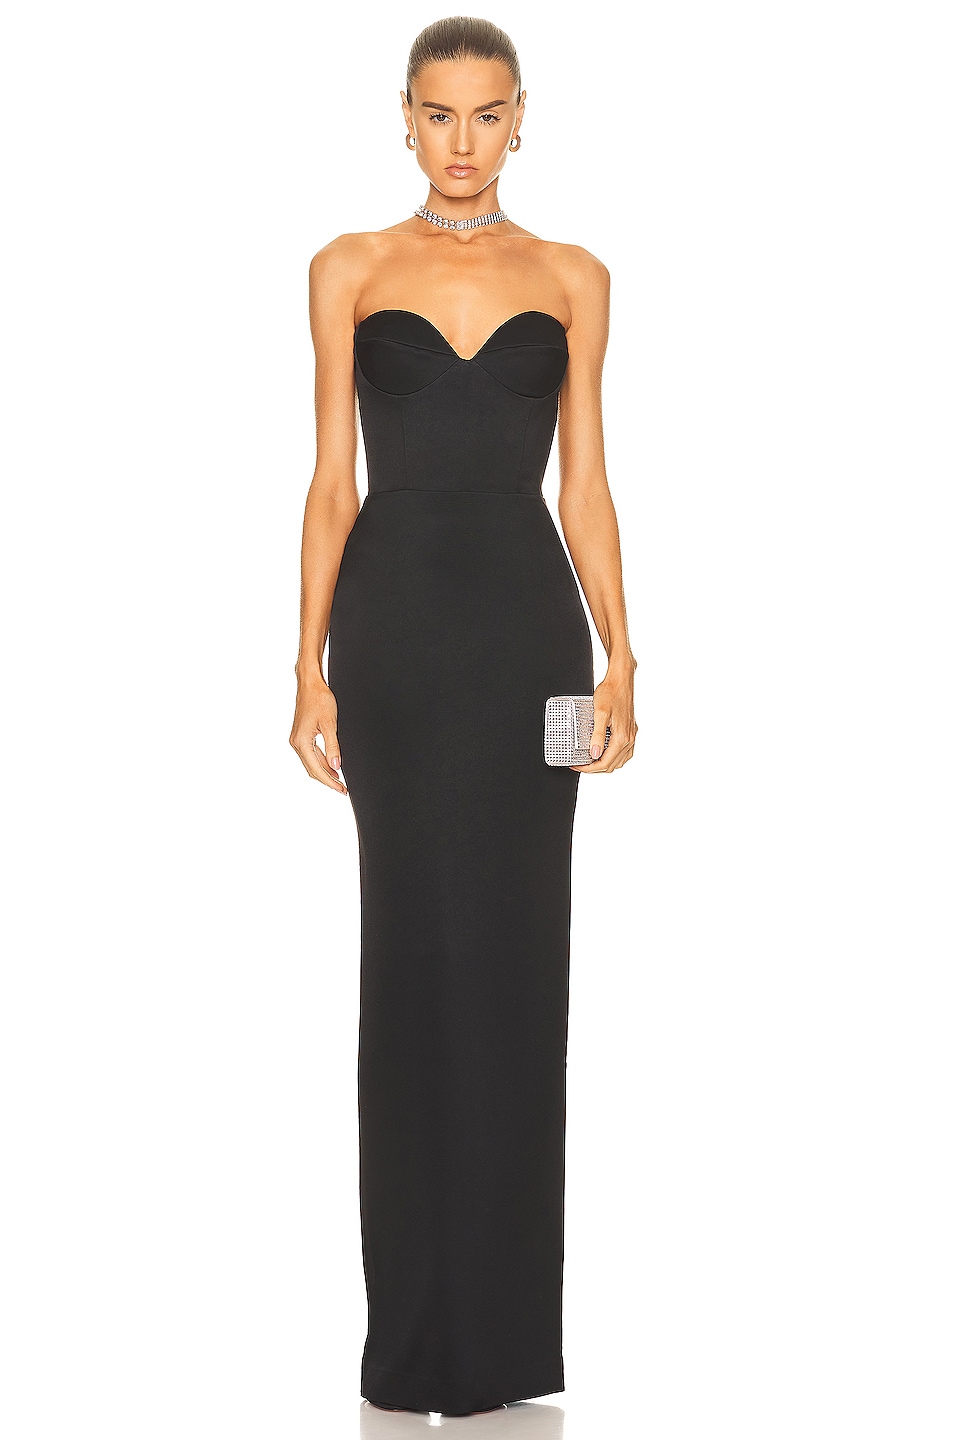 Alex Perry Cordell Sweetheart Cup Column Dress in Black | FWRD